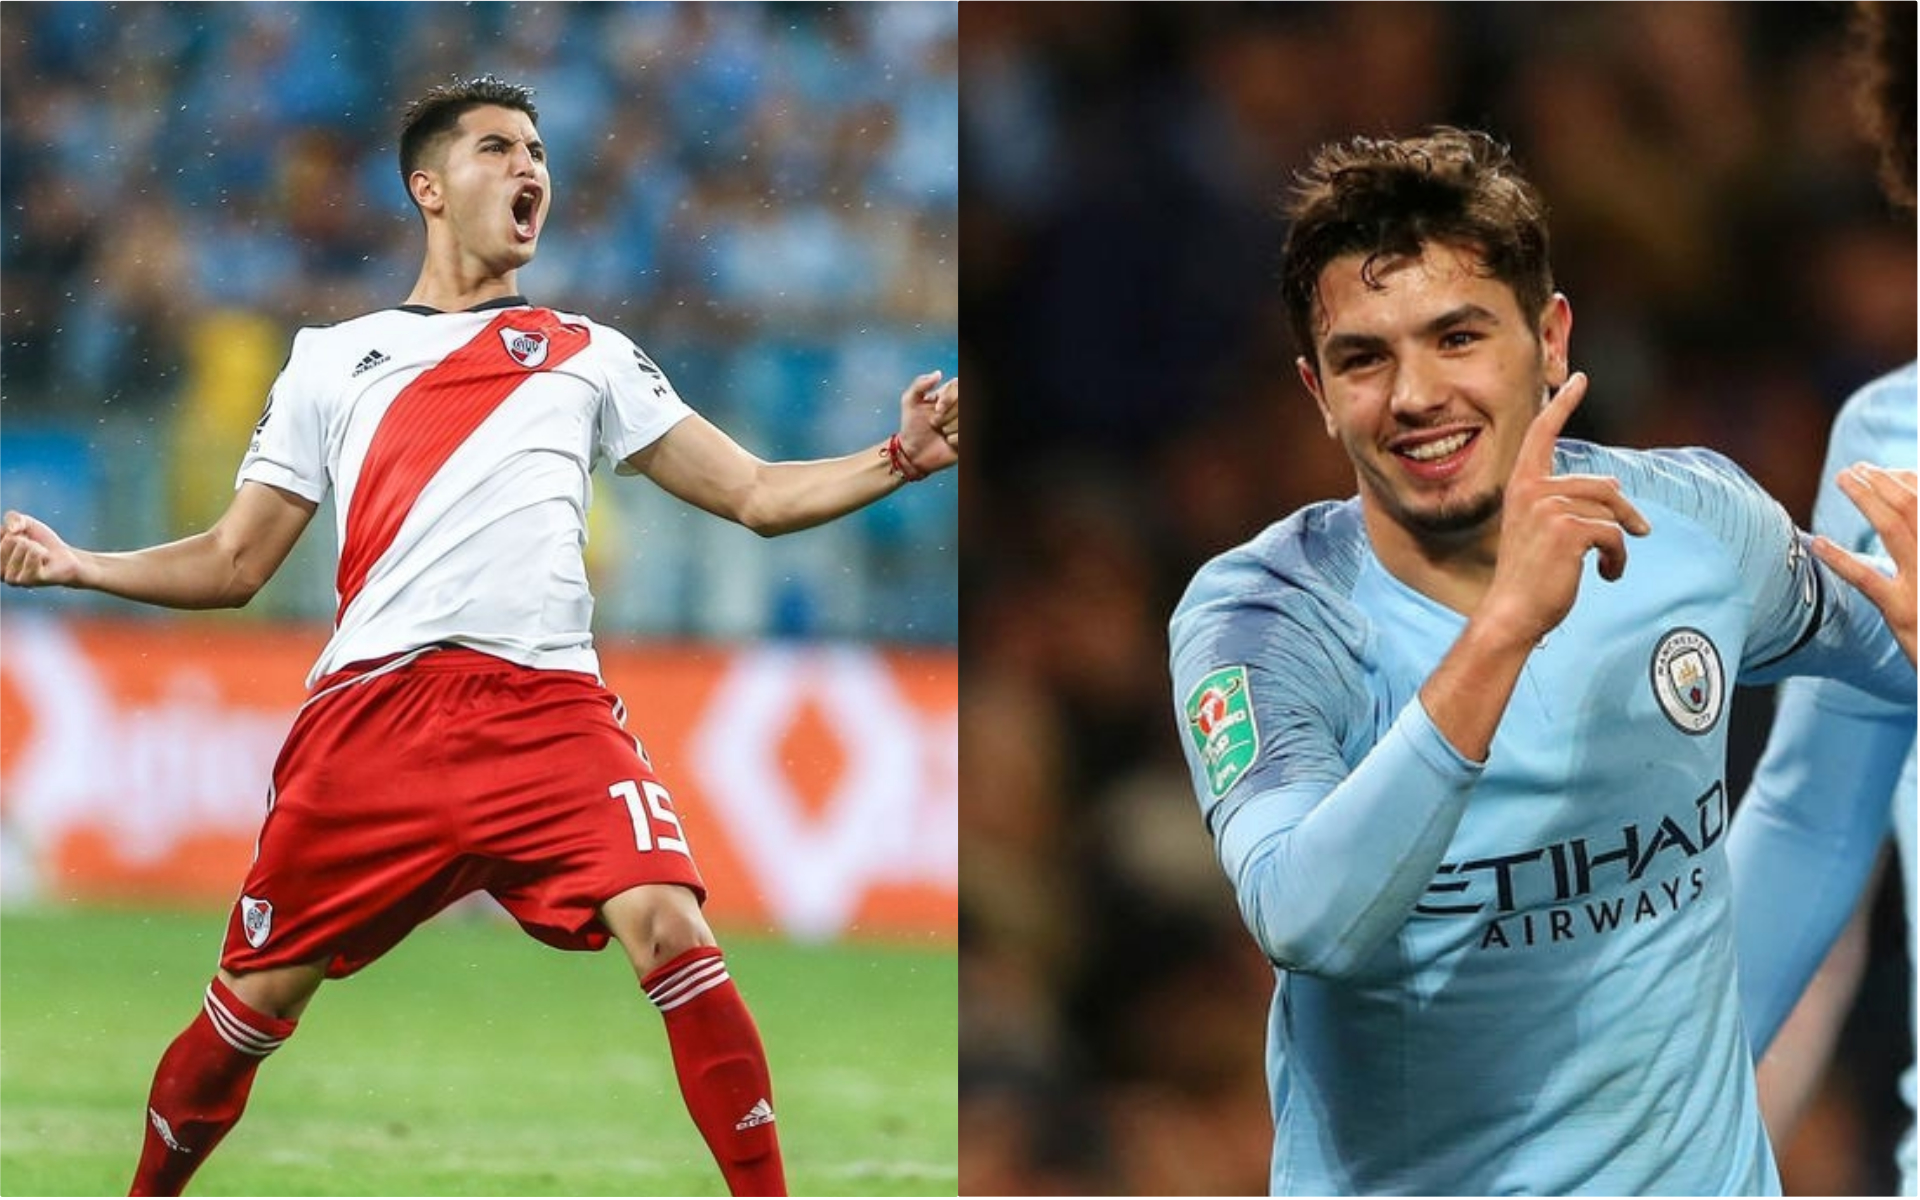 Palacios And Brahim Joining Real Madrid In January